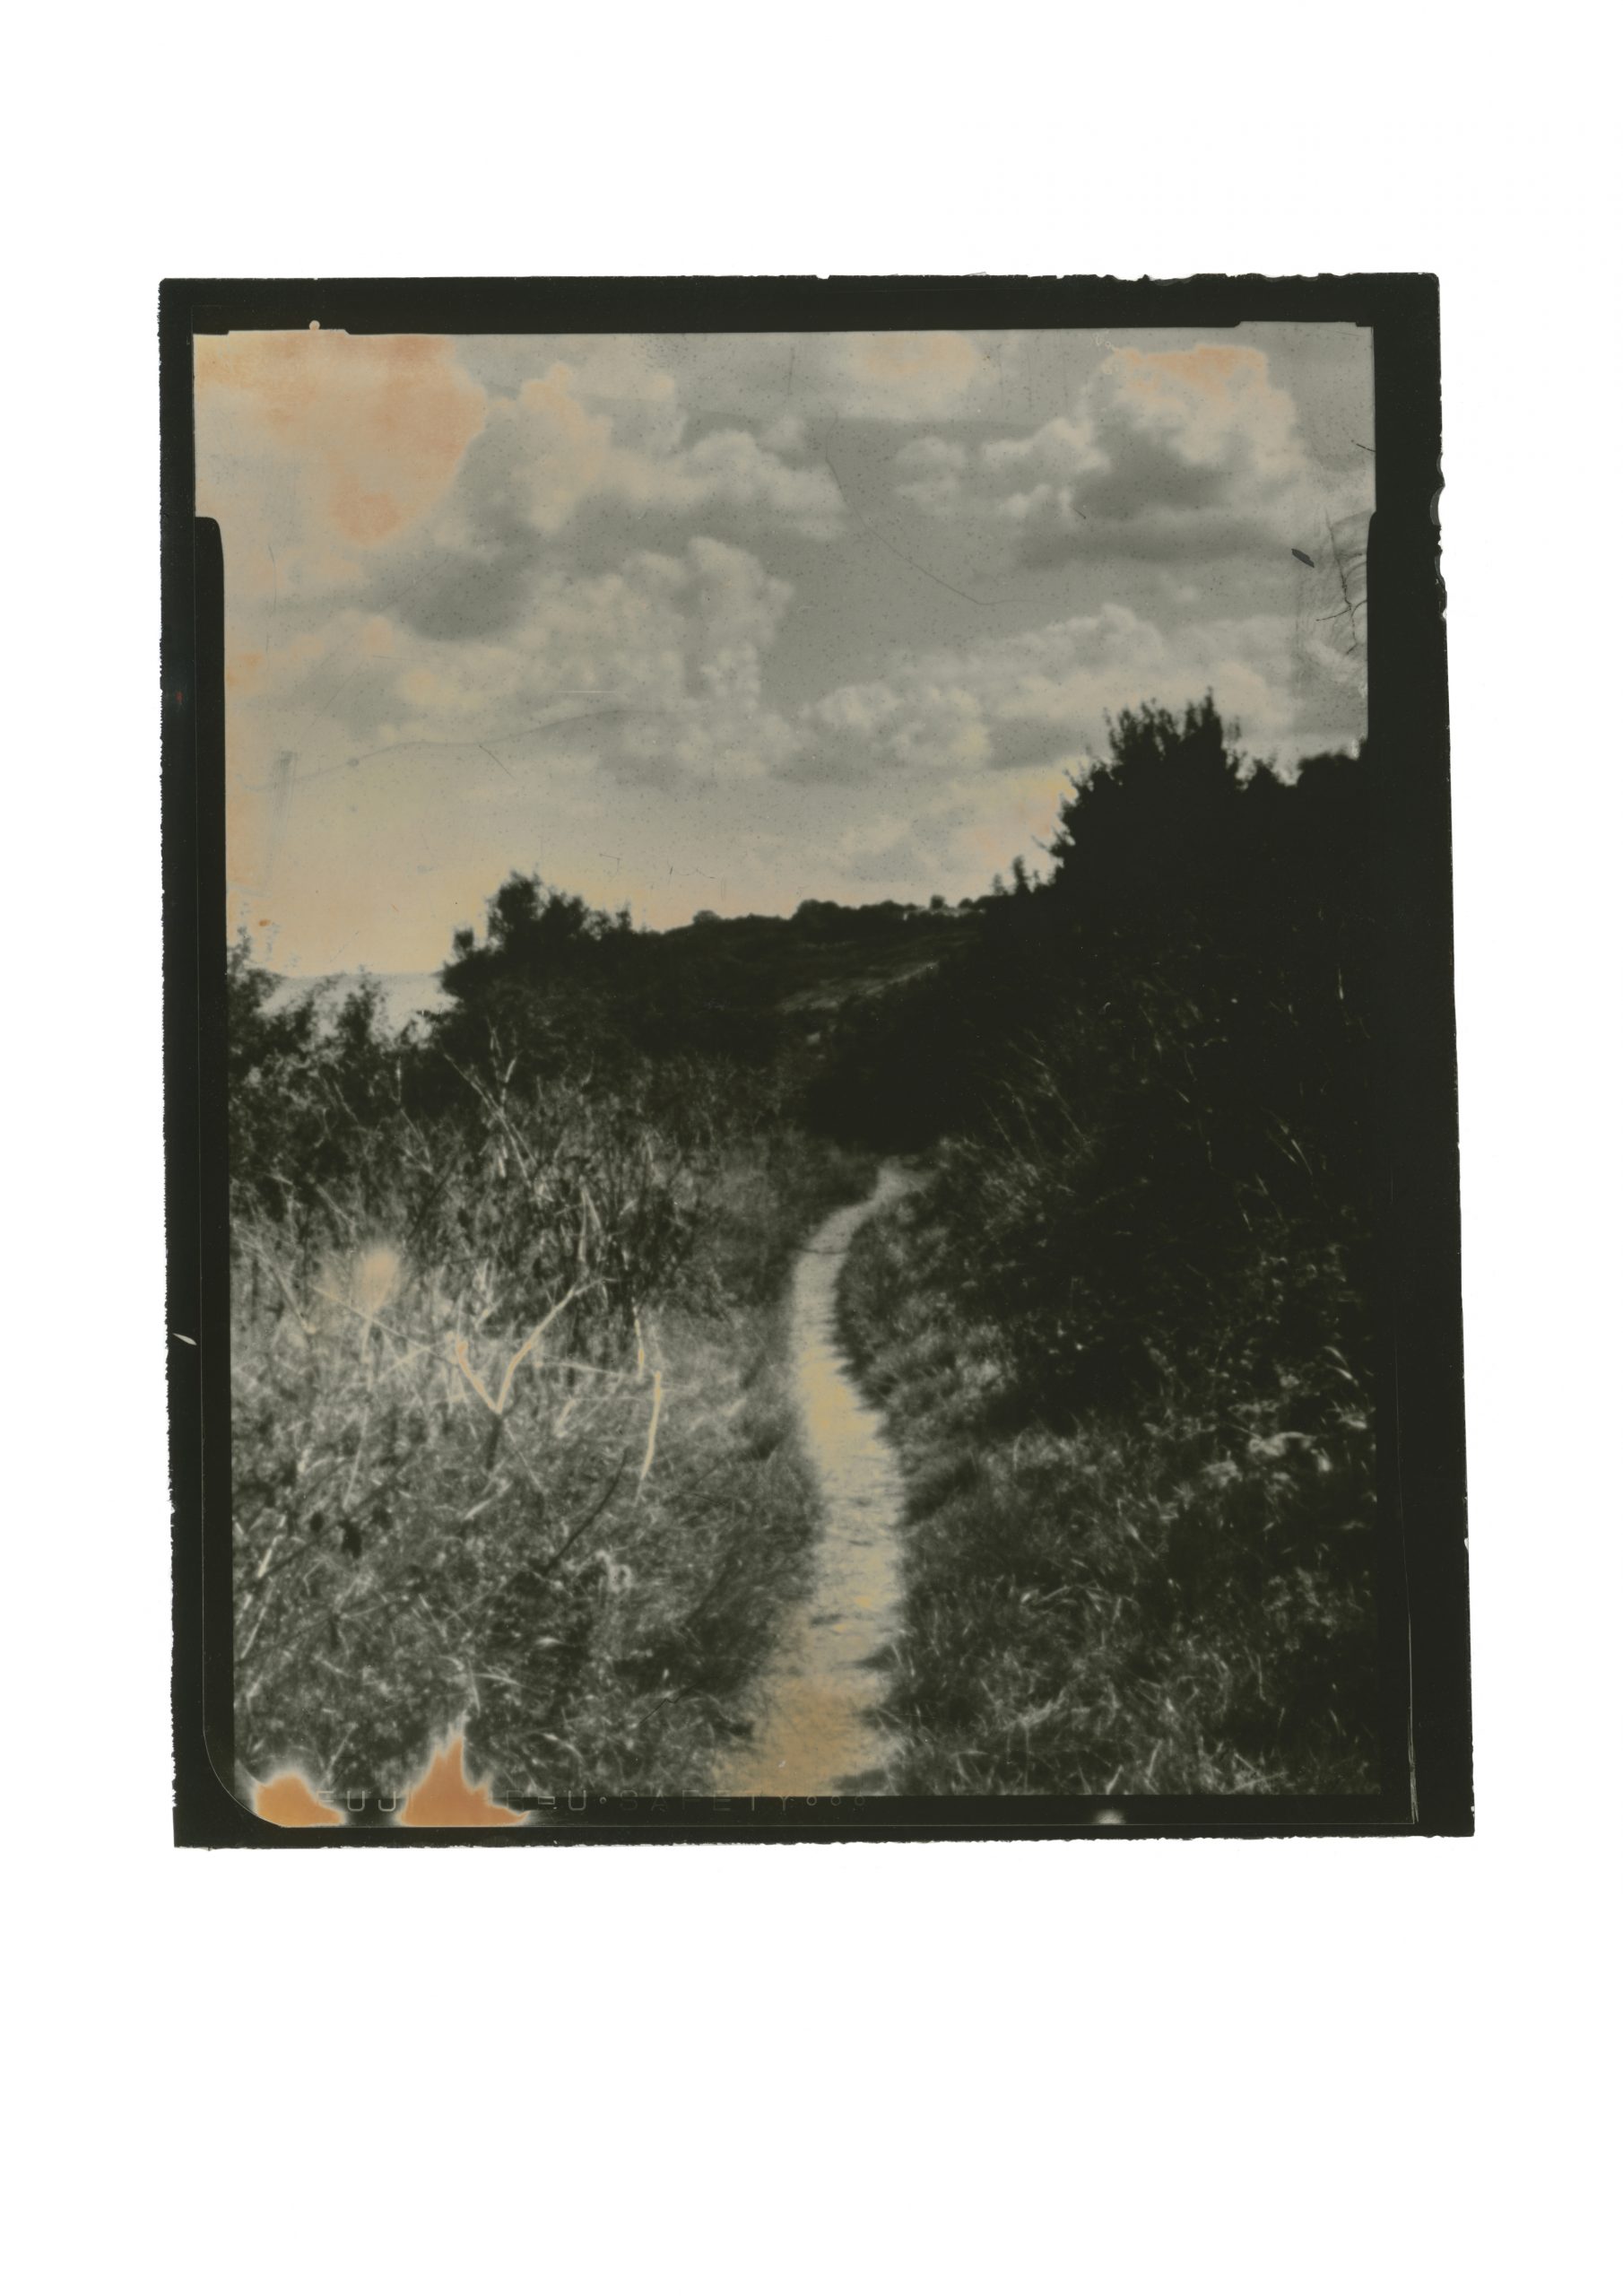 central path amongst overgrown bushes leading to an almost vanishing points it curves out of sight. sky full of clouds with a hint of orange from hand painting